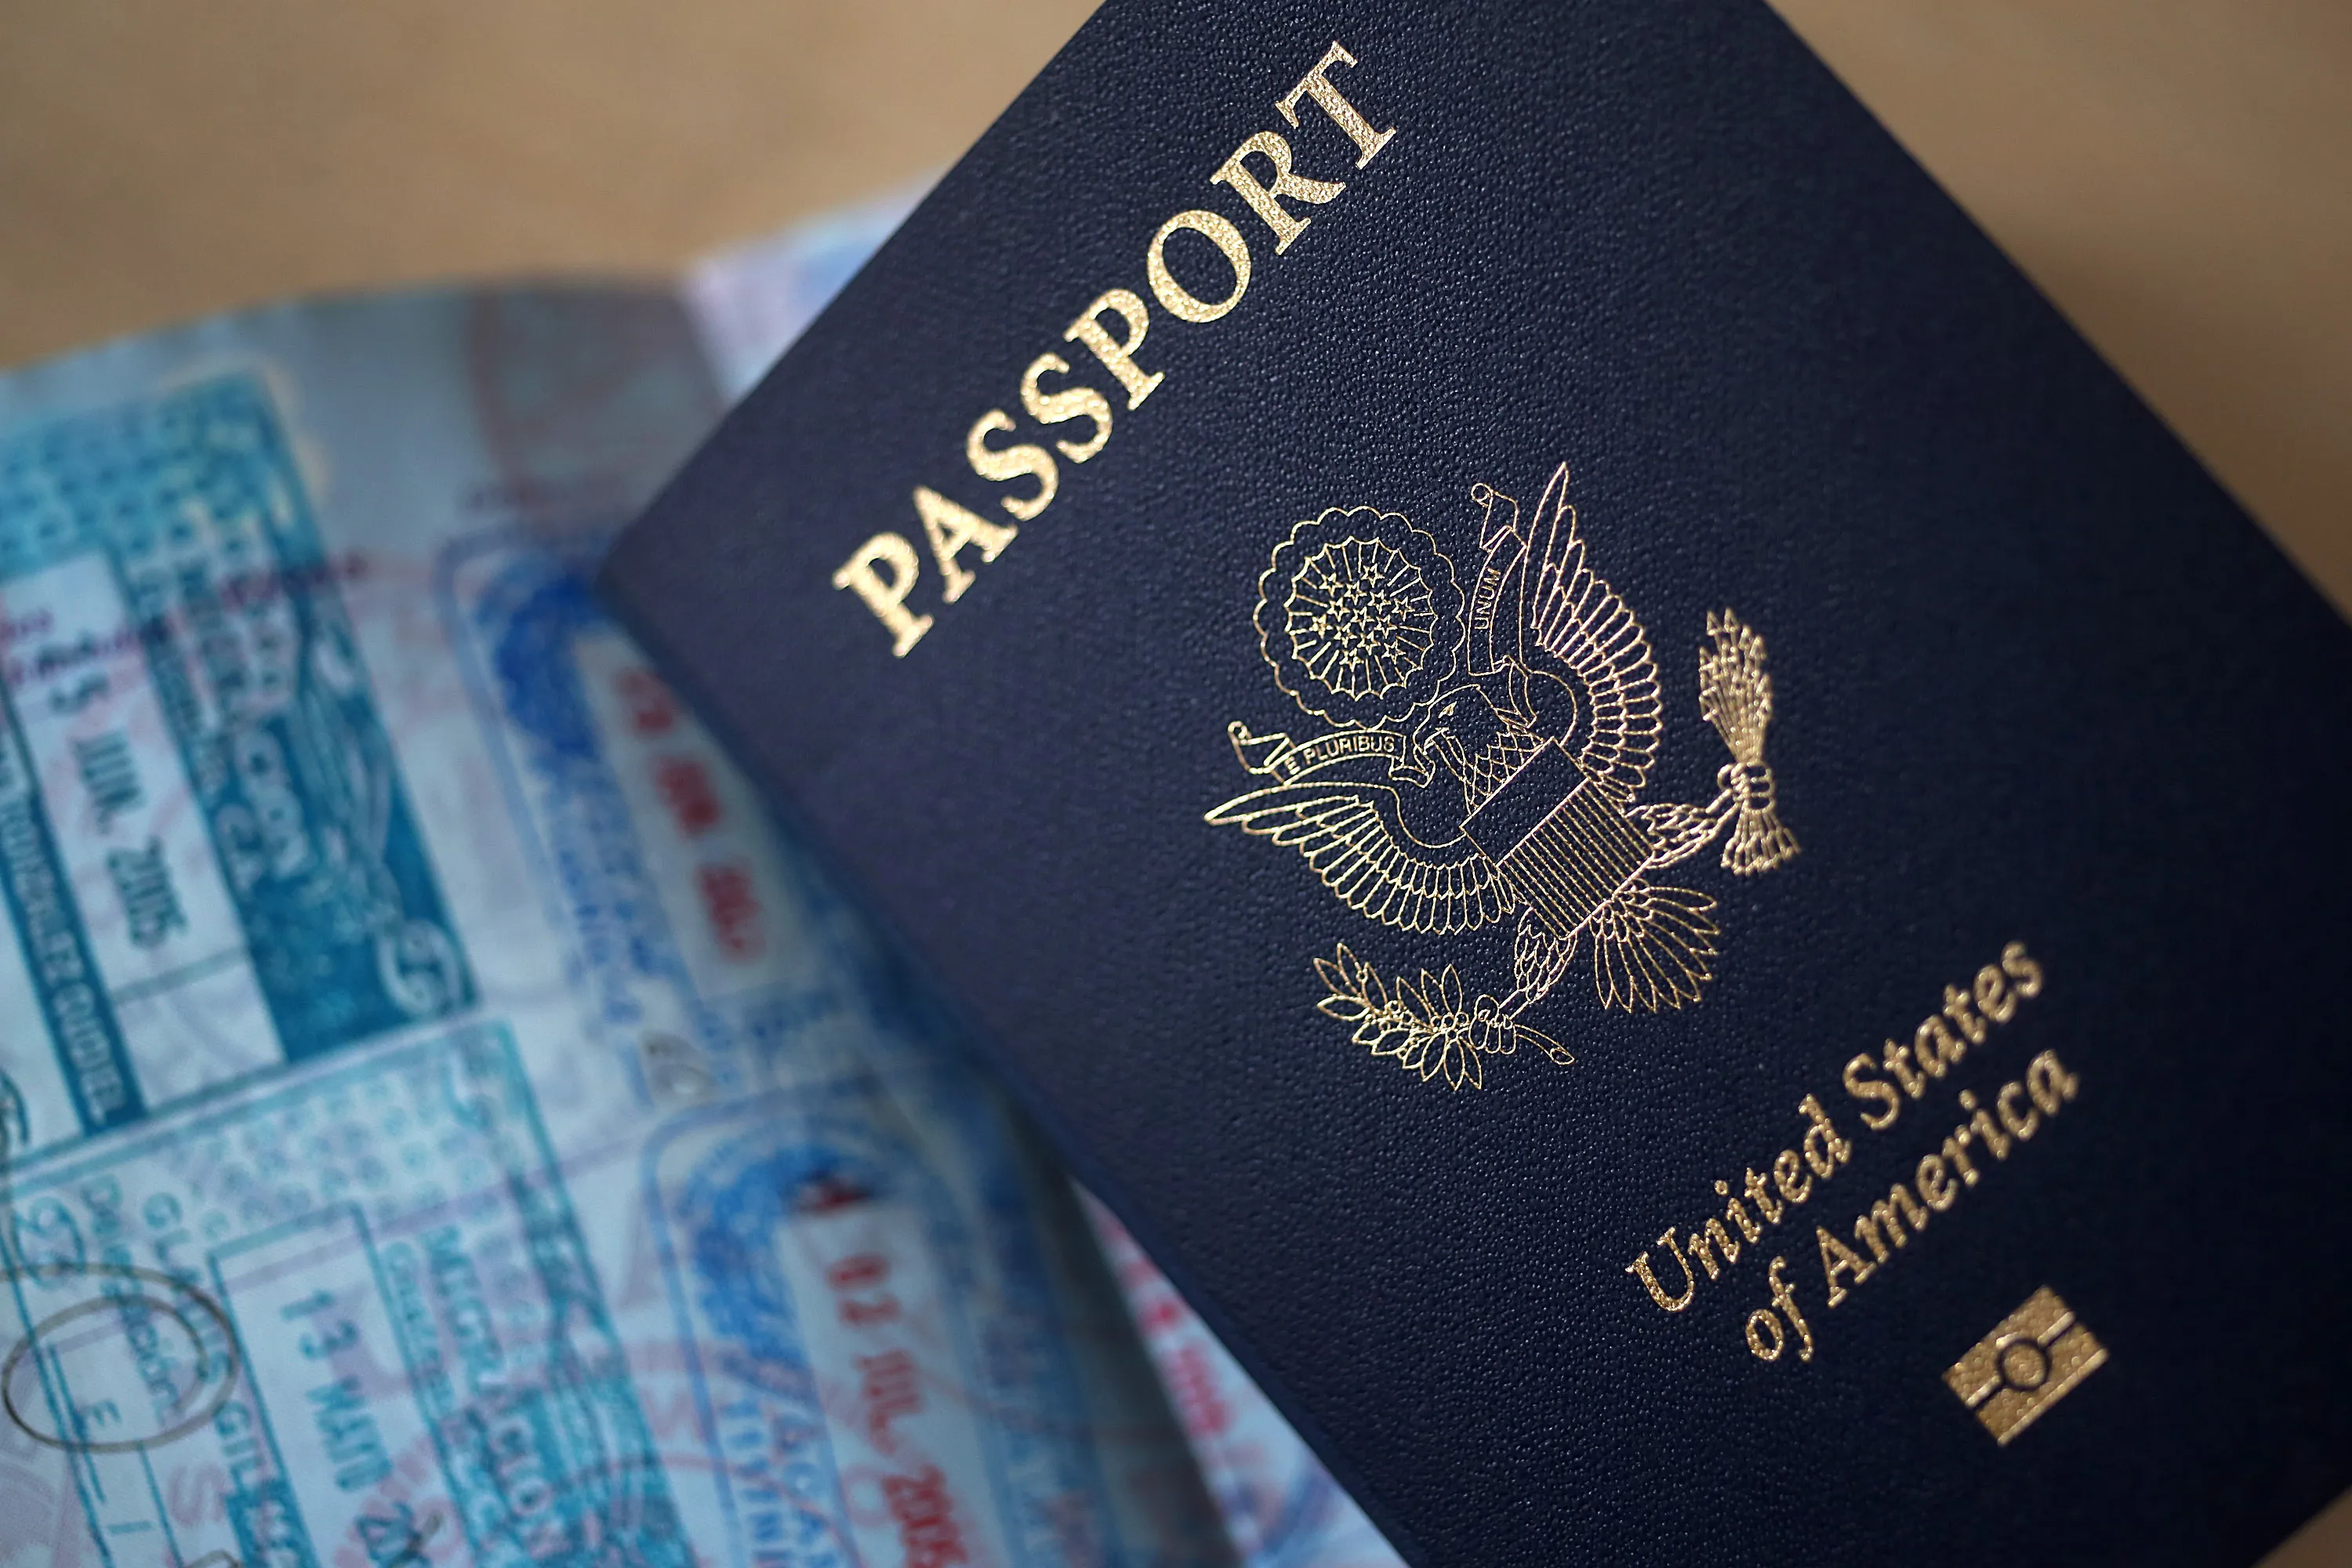 Didn't Pay Your Taxes? You Could Lose Your Passport